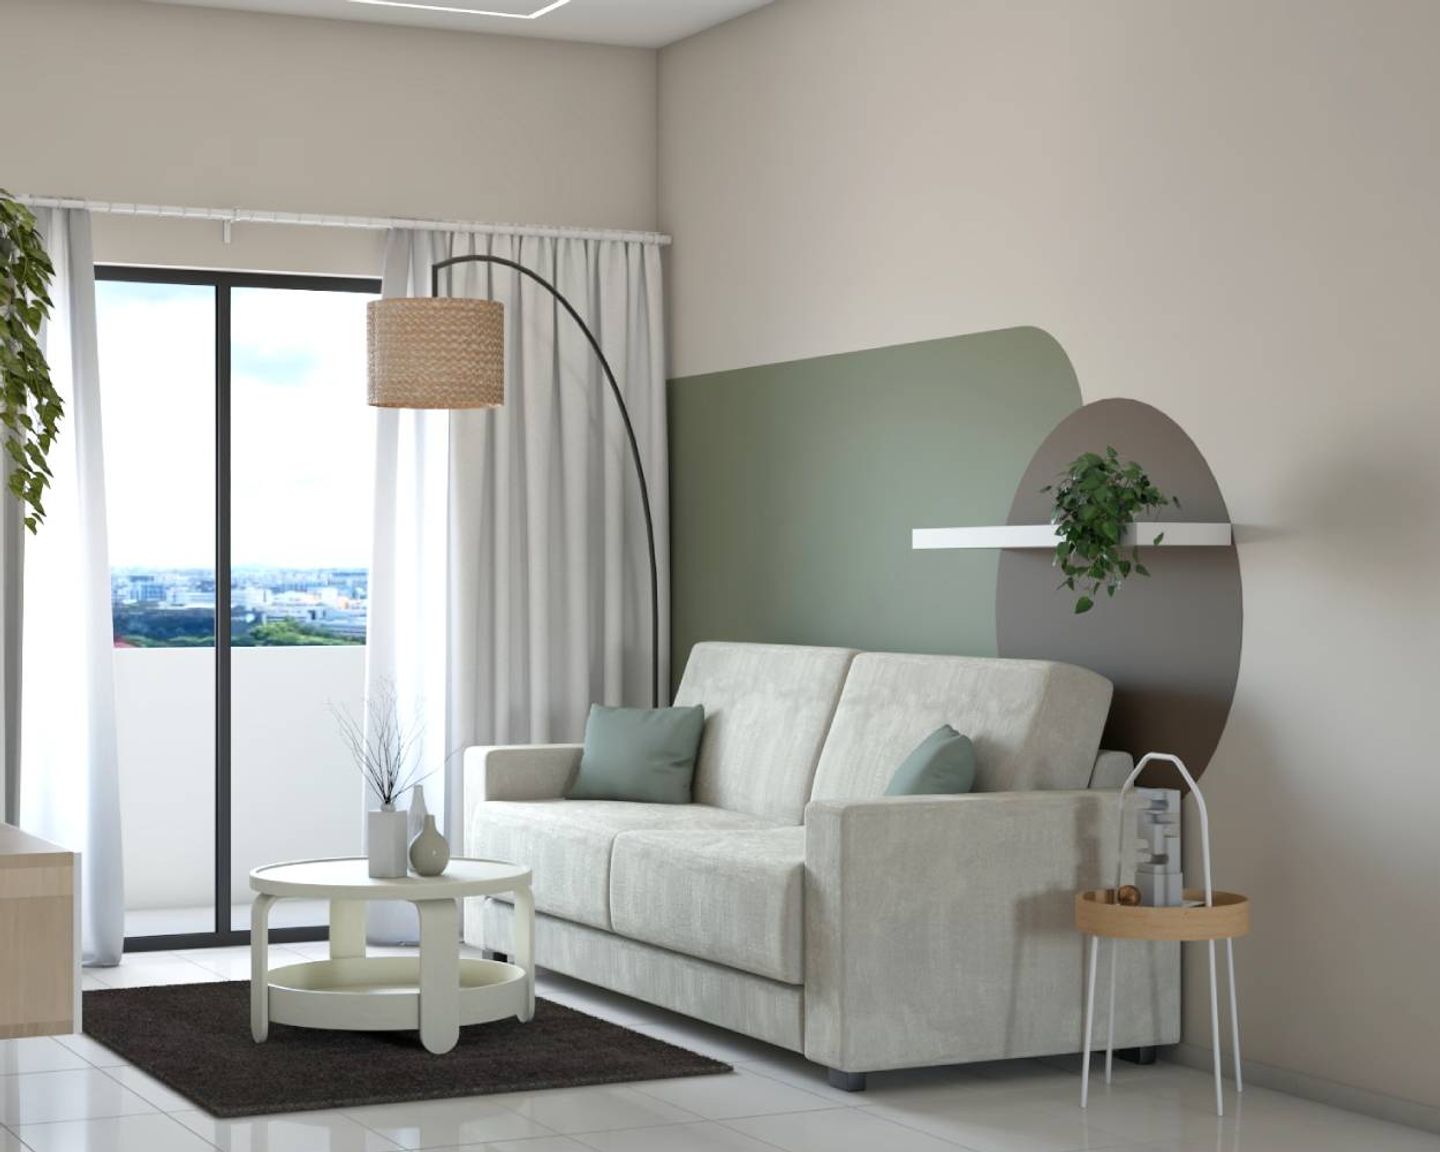 Spacious Living Room Design With Tri-Toned Wall, Off-White 2 Seater And Rattan Floor Lamp - Livspace